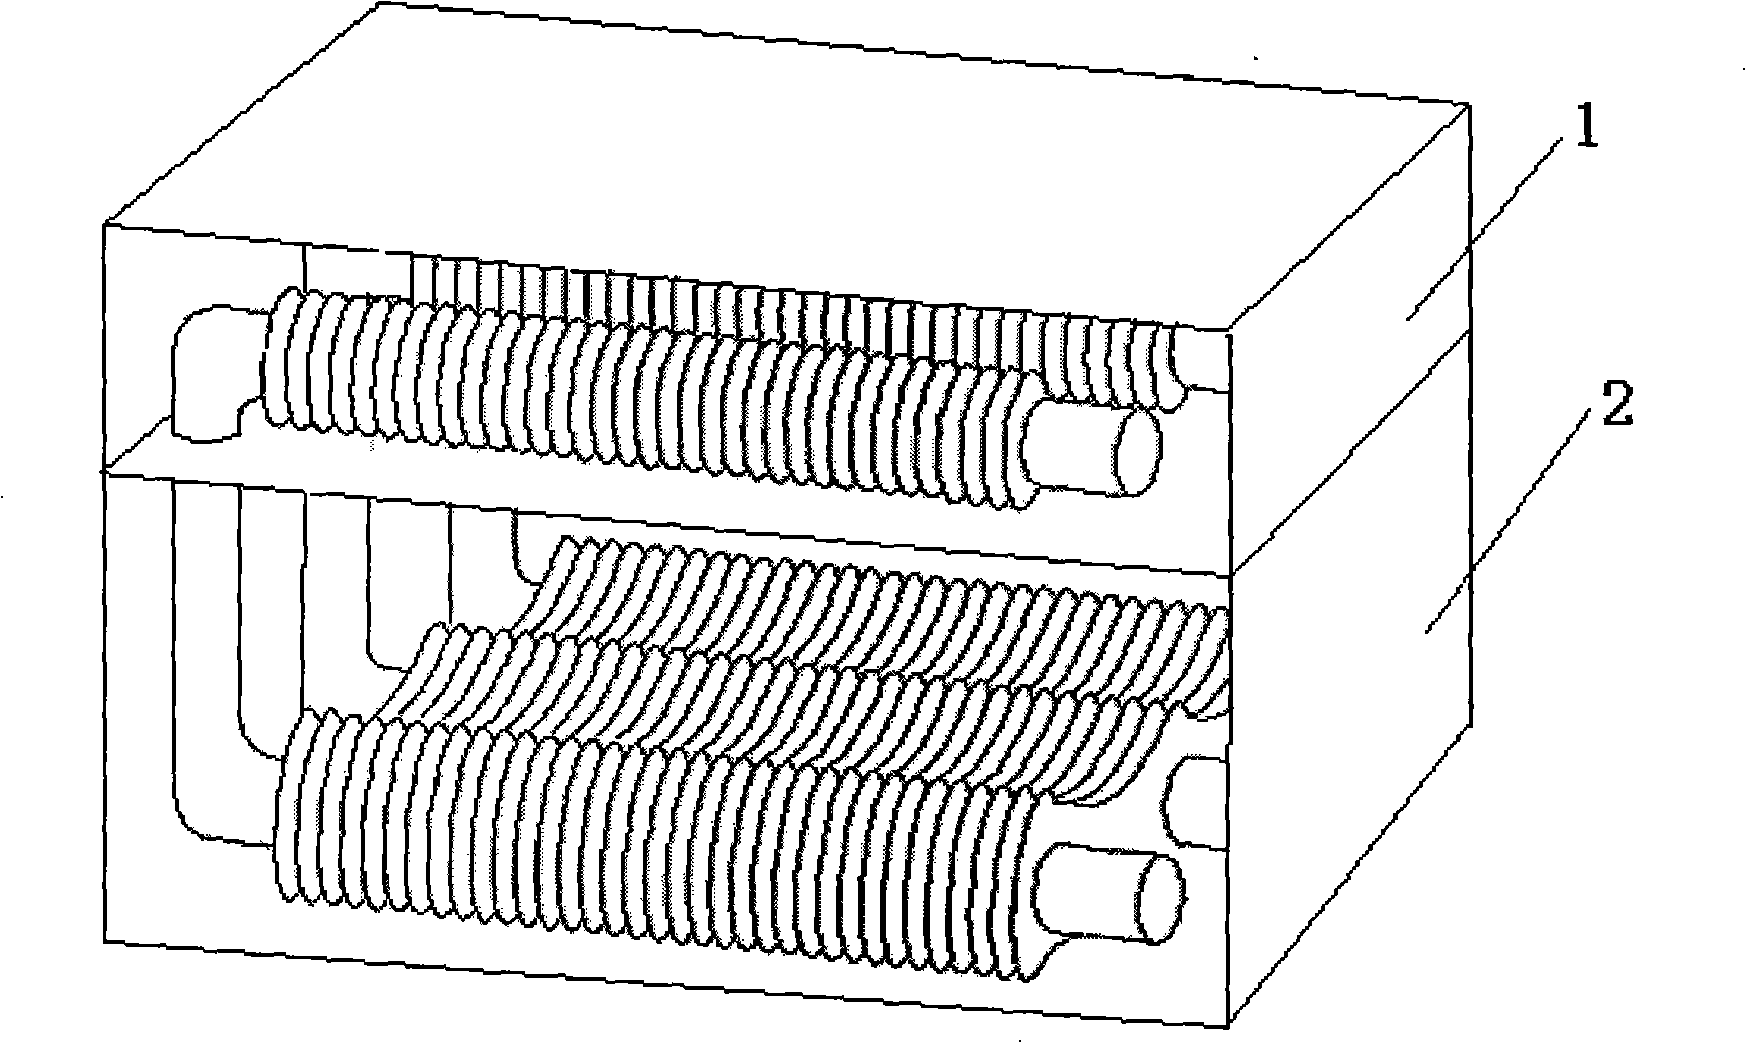 Composite anti-corrosion heat-exchanger by using flue gas to condense thermal energy